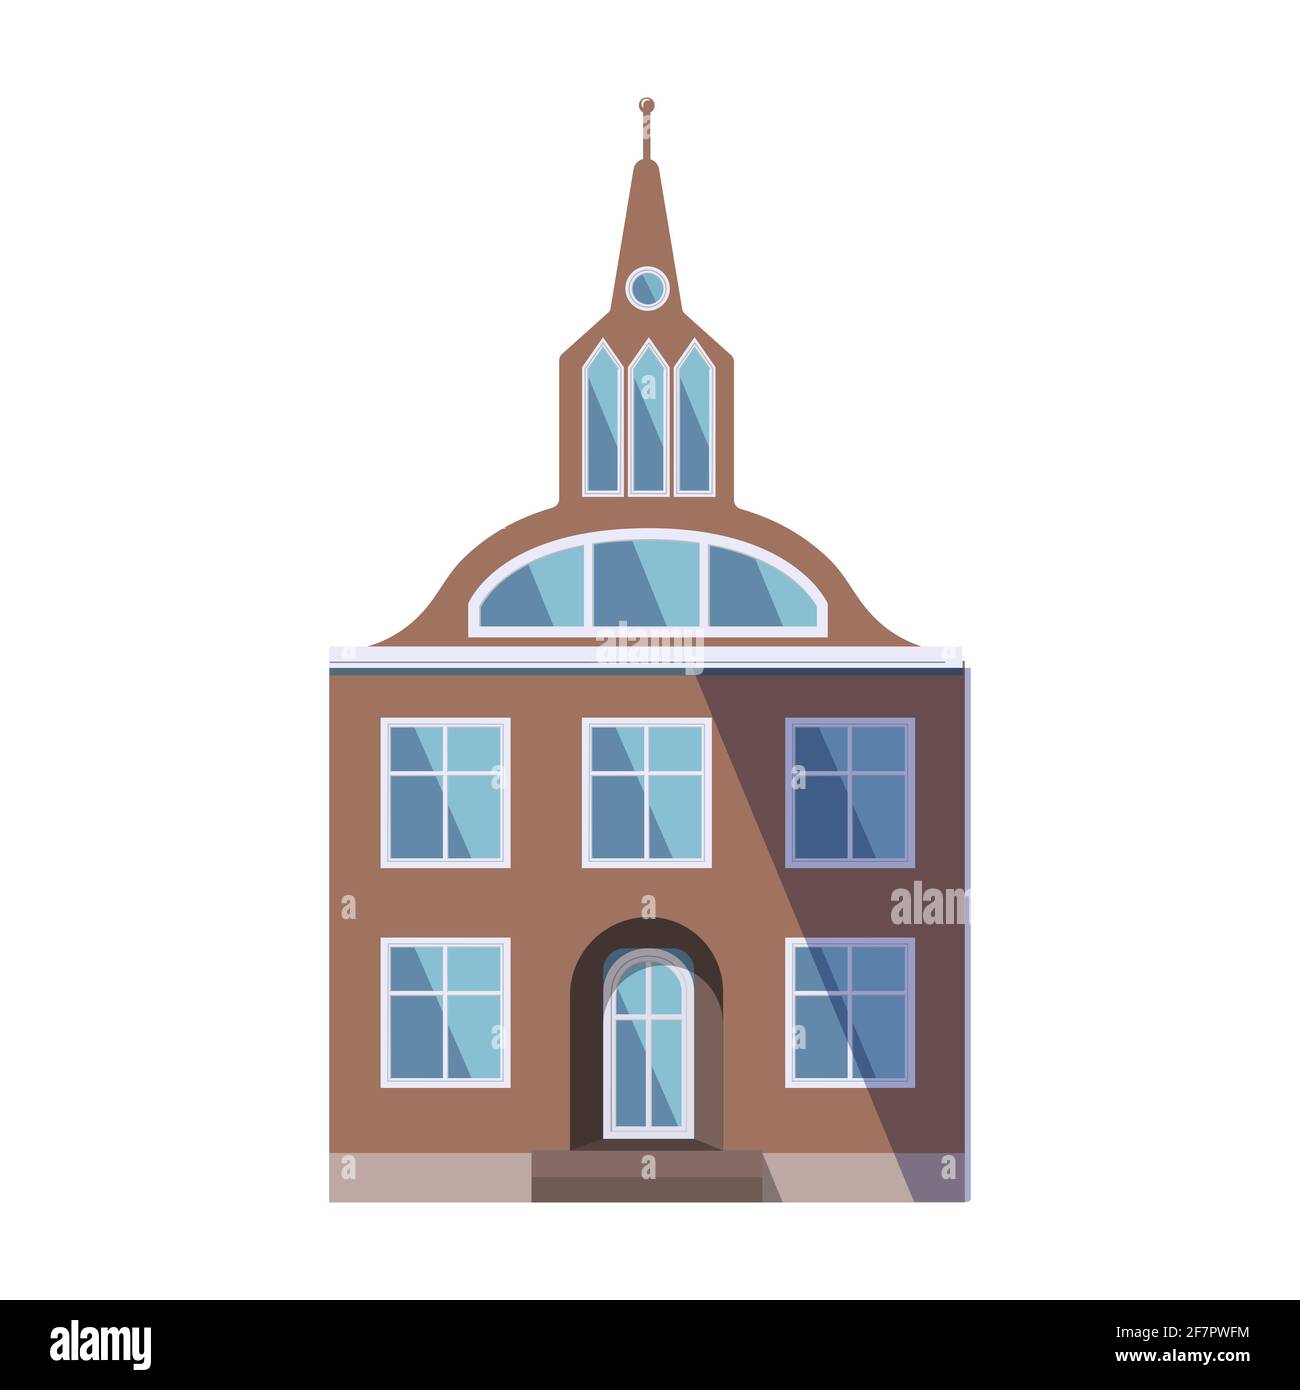 European brown old house in the traditional Dutch town style with a double gable roof, turret, narrow windows and front door. Vector illustration in Stock Vector